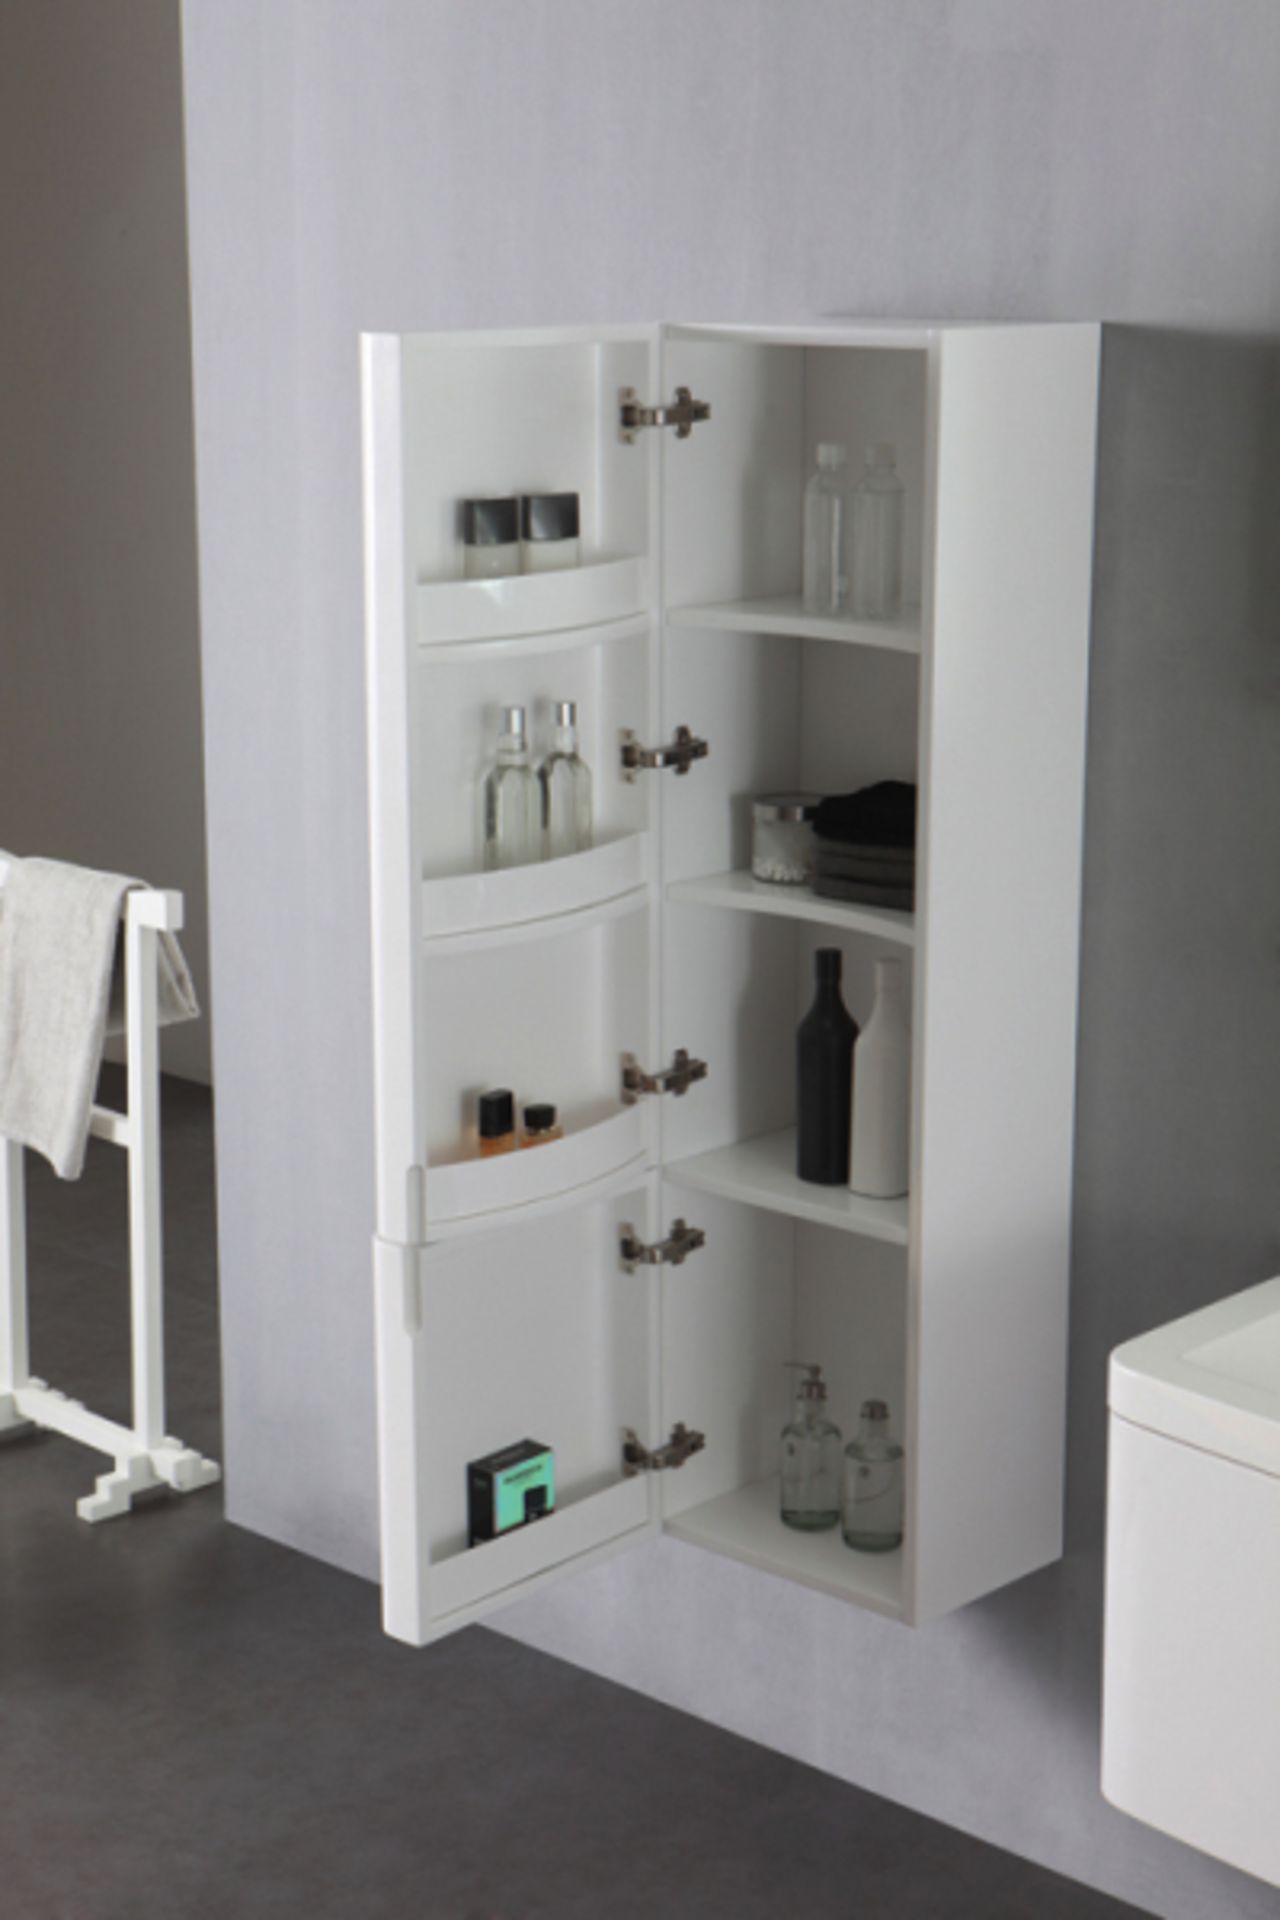 1 x White Gloss Storage Cabinet 120 - A-Grade - Ref:ASC42-120 - CL170 - Location: Nottingham NG2 - - Image 2 of 4